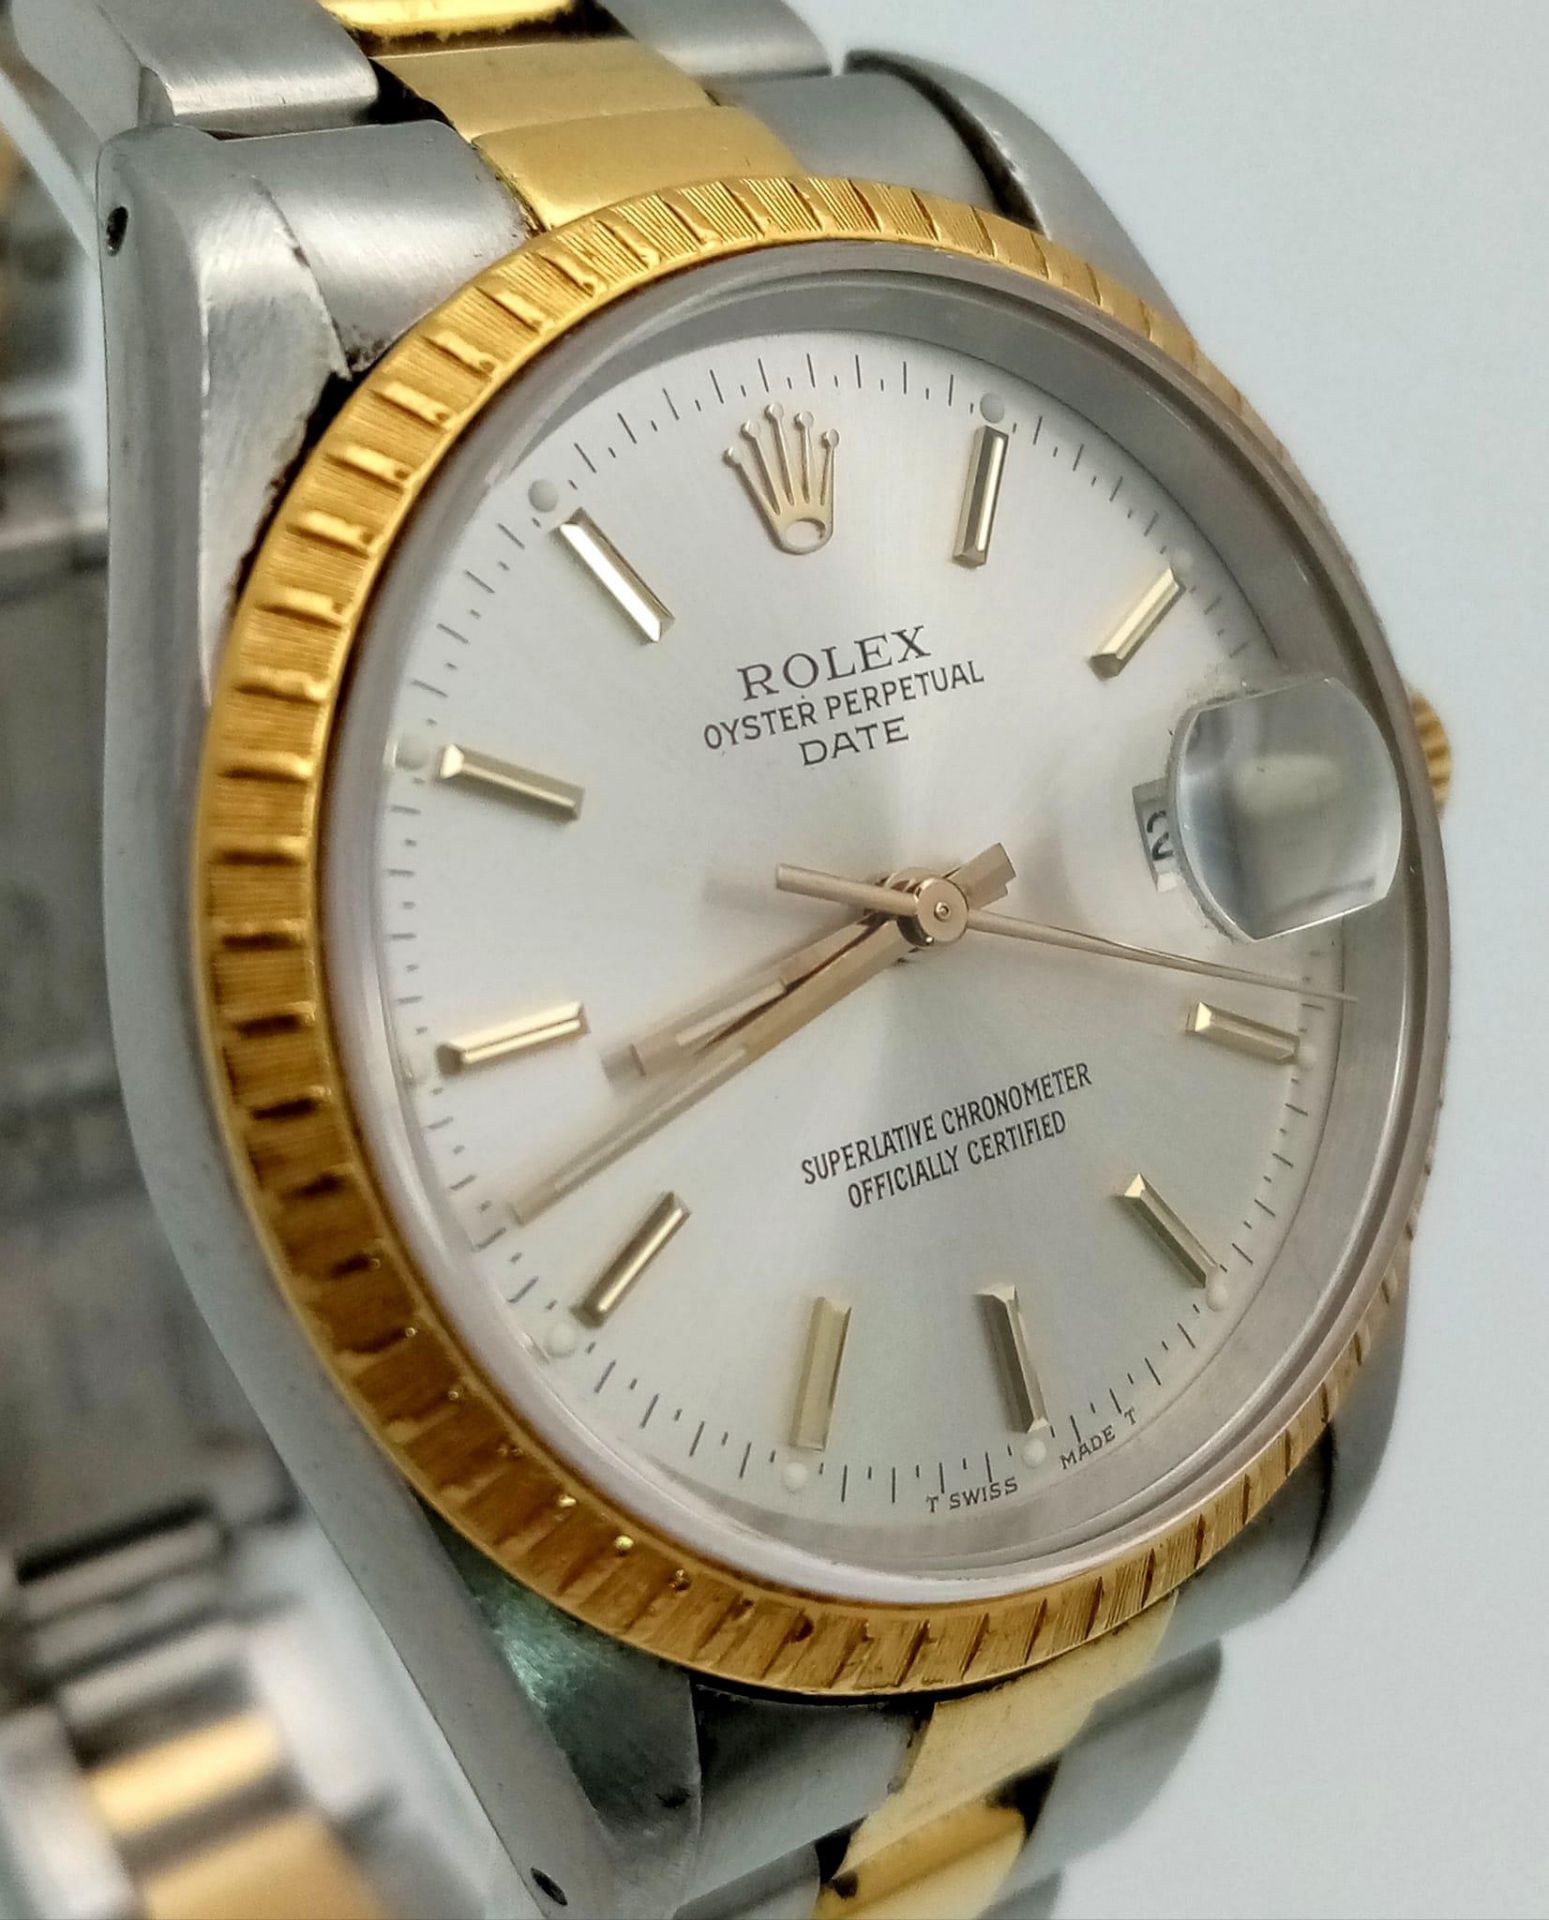 THE CLASSIC ROLEX OYSTER PERPETUAL DATE AUTOMATIC BI-METAL GENTS WATCH WITH TASTEFUL SILVERTONE DIAL - Image 5 of 19